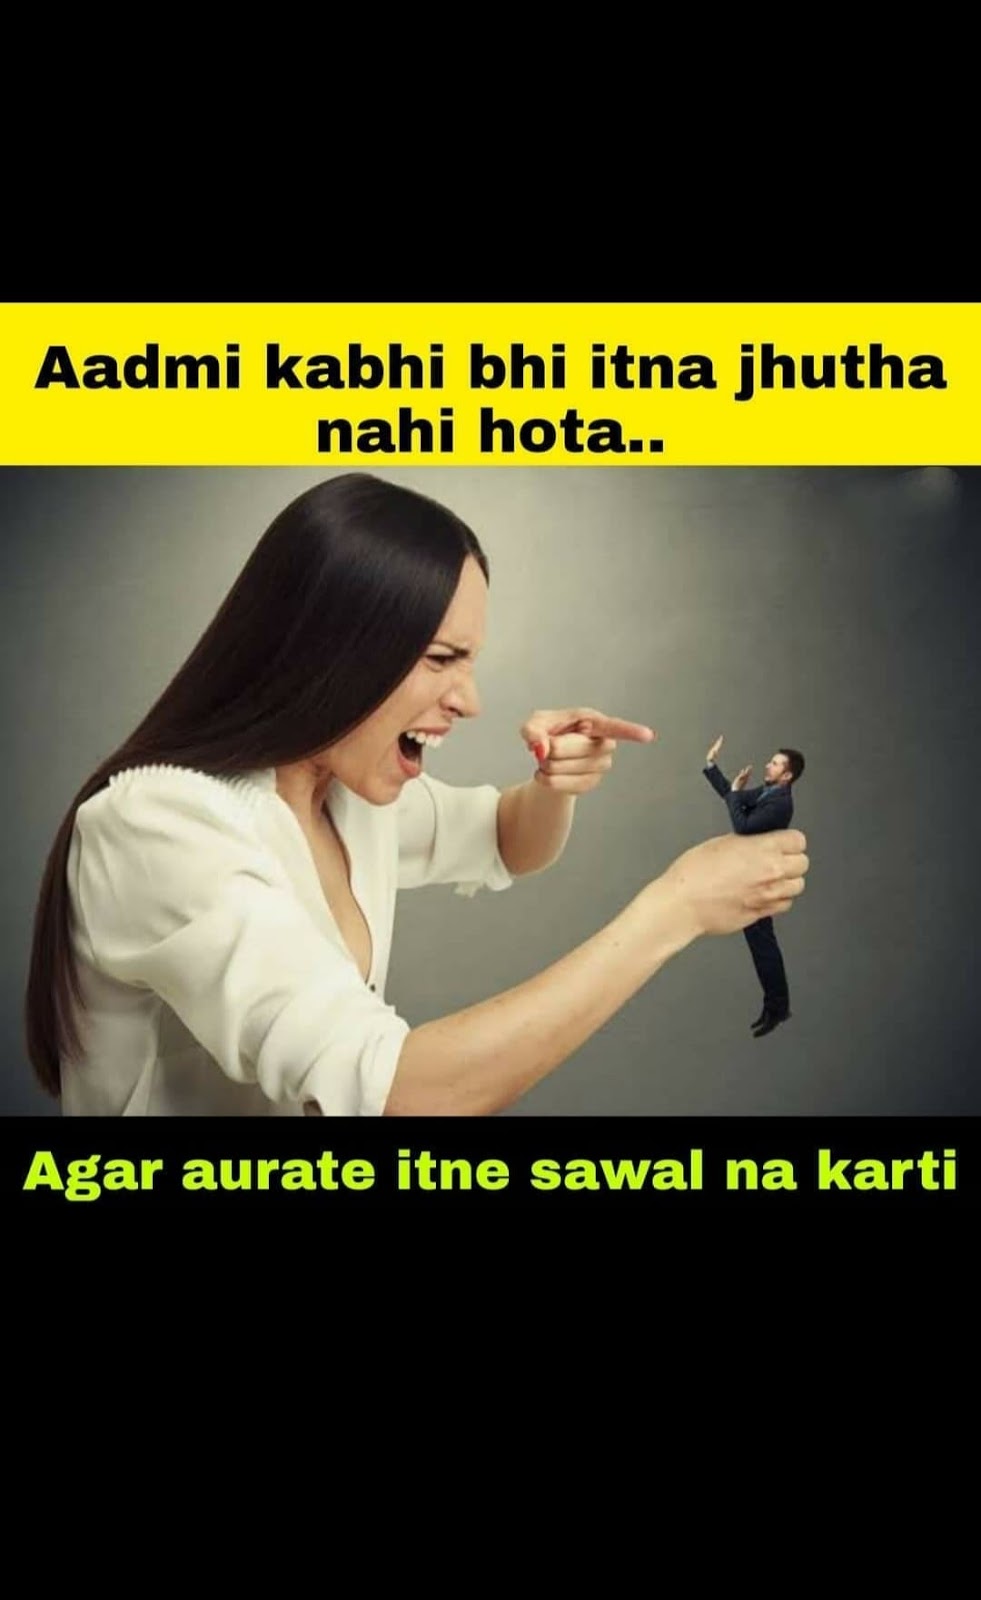 Latest Indian Memes In Hindi For Facebook Free Download Statuspictures Com Statuspictures Com